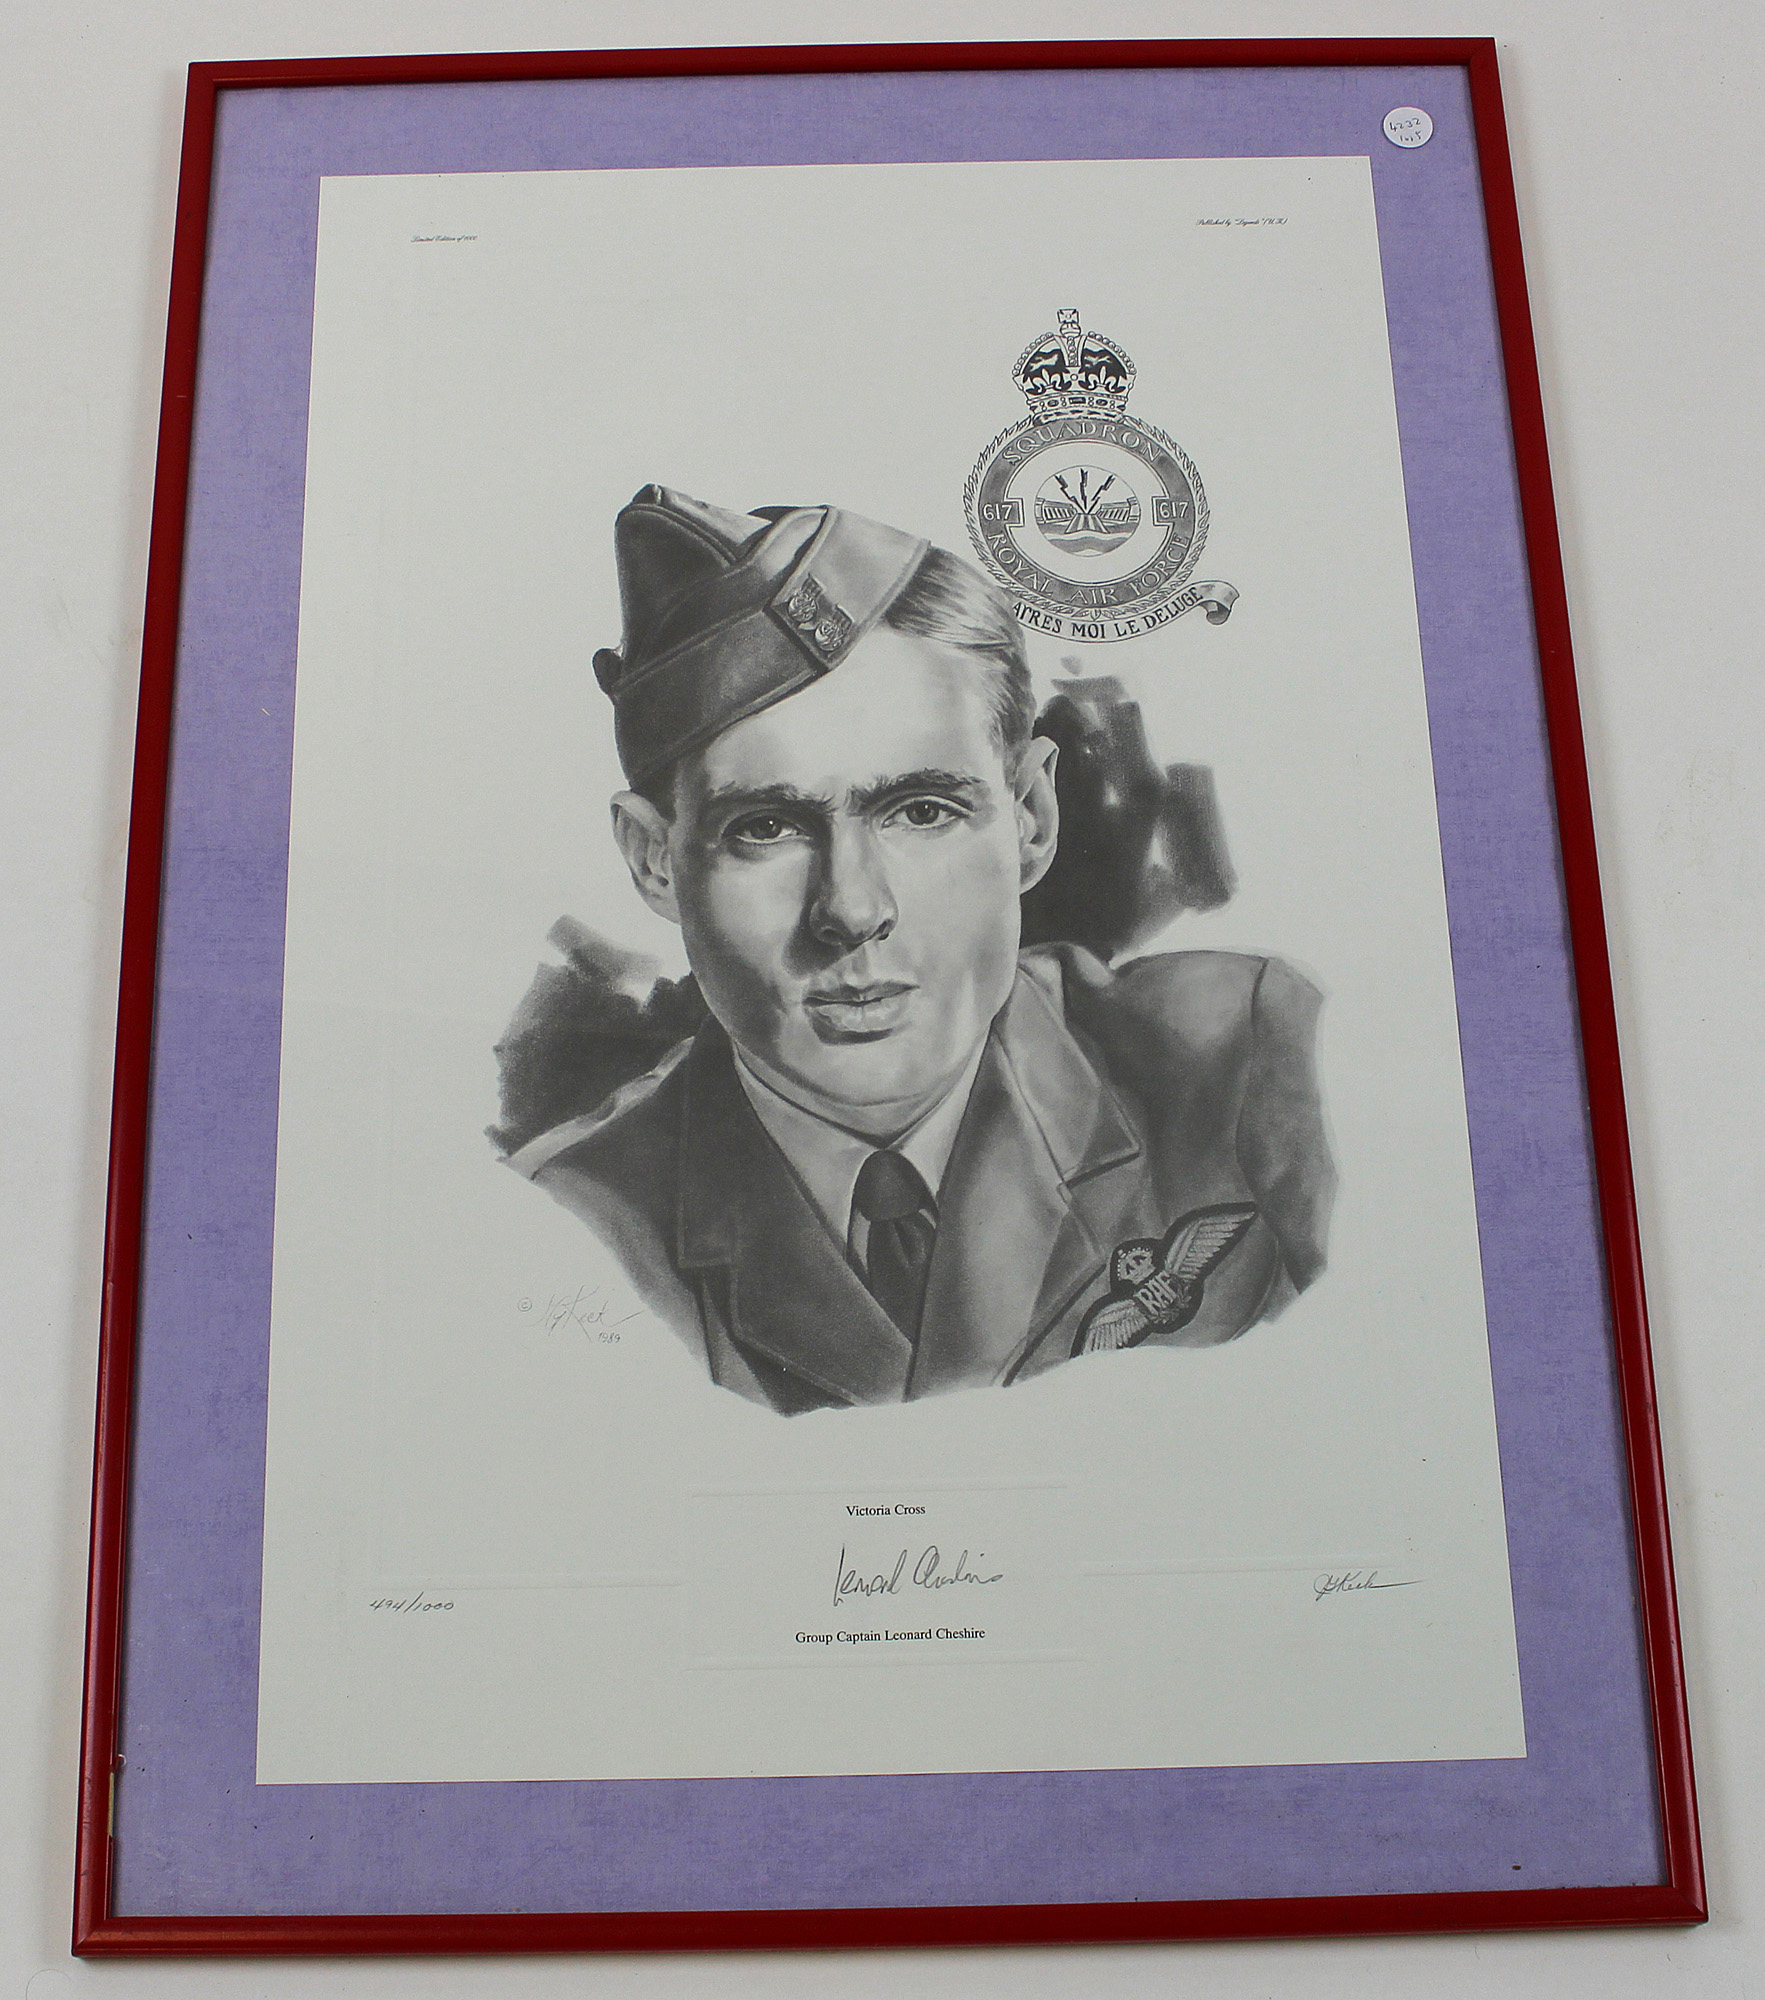 Limited edition signed print of RAF Group Captain Leonard Cheshire, signed by the artist, limited